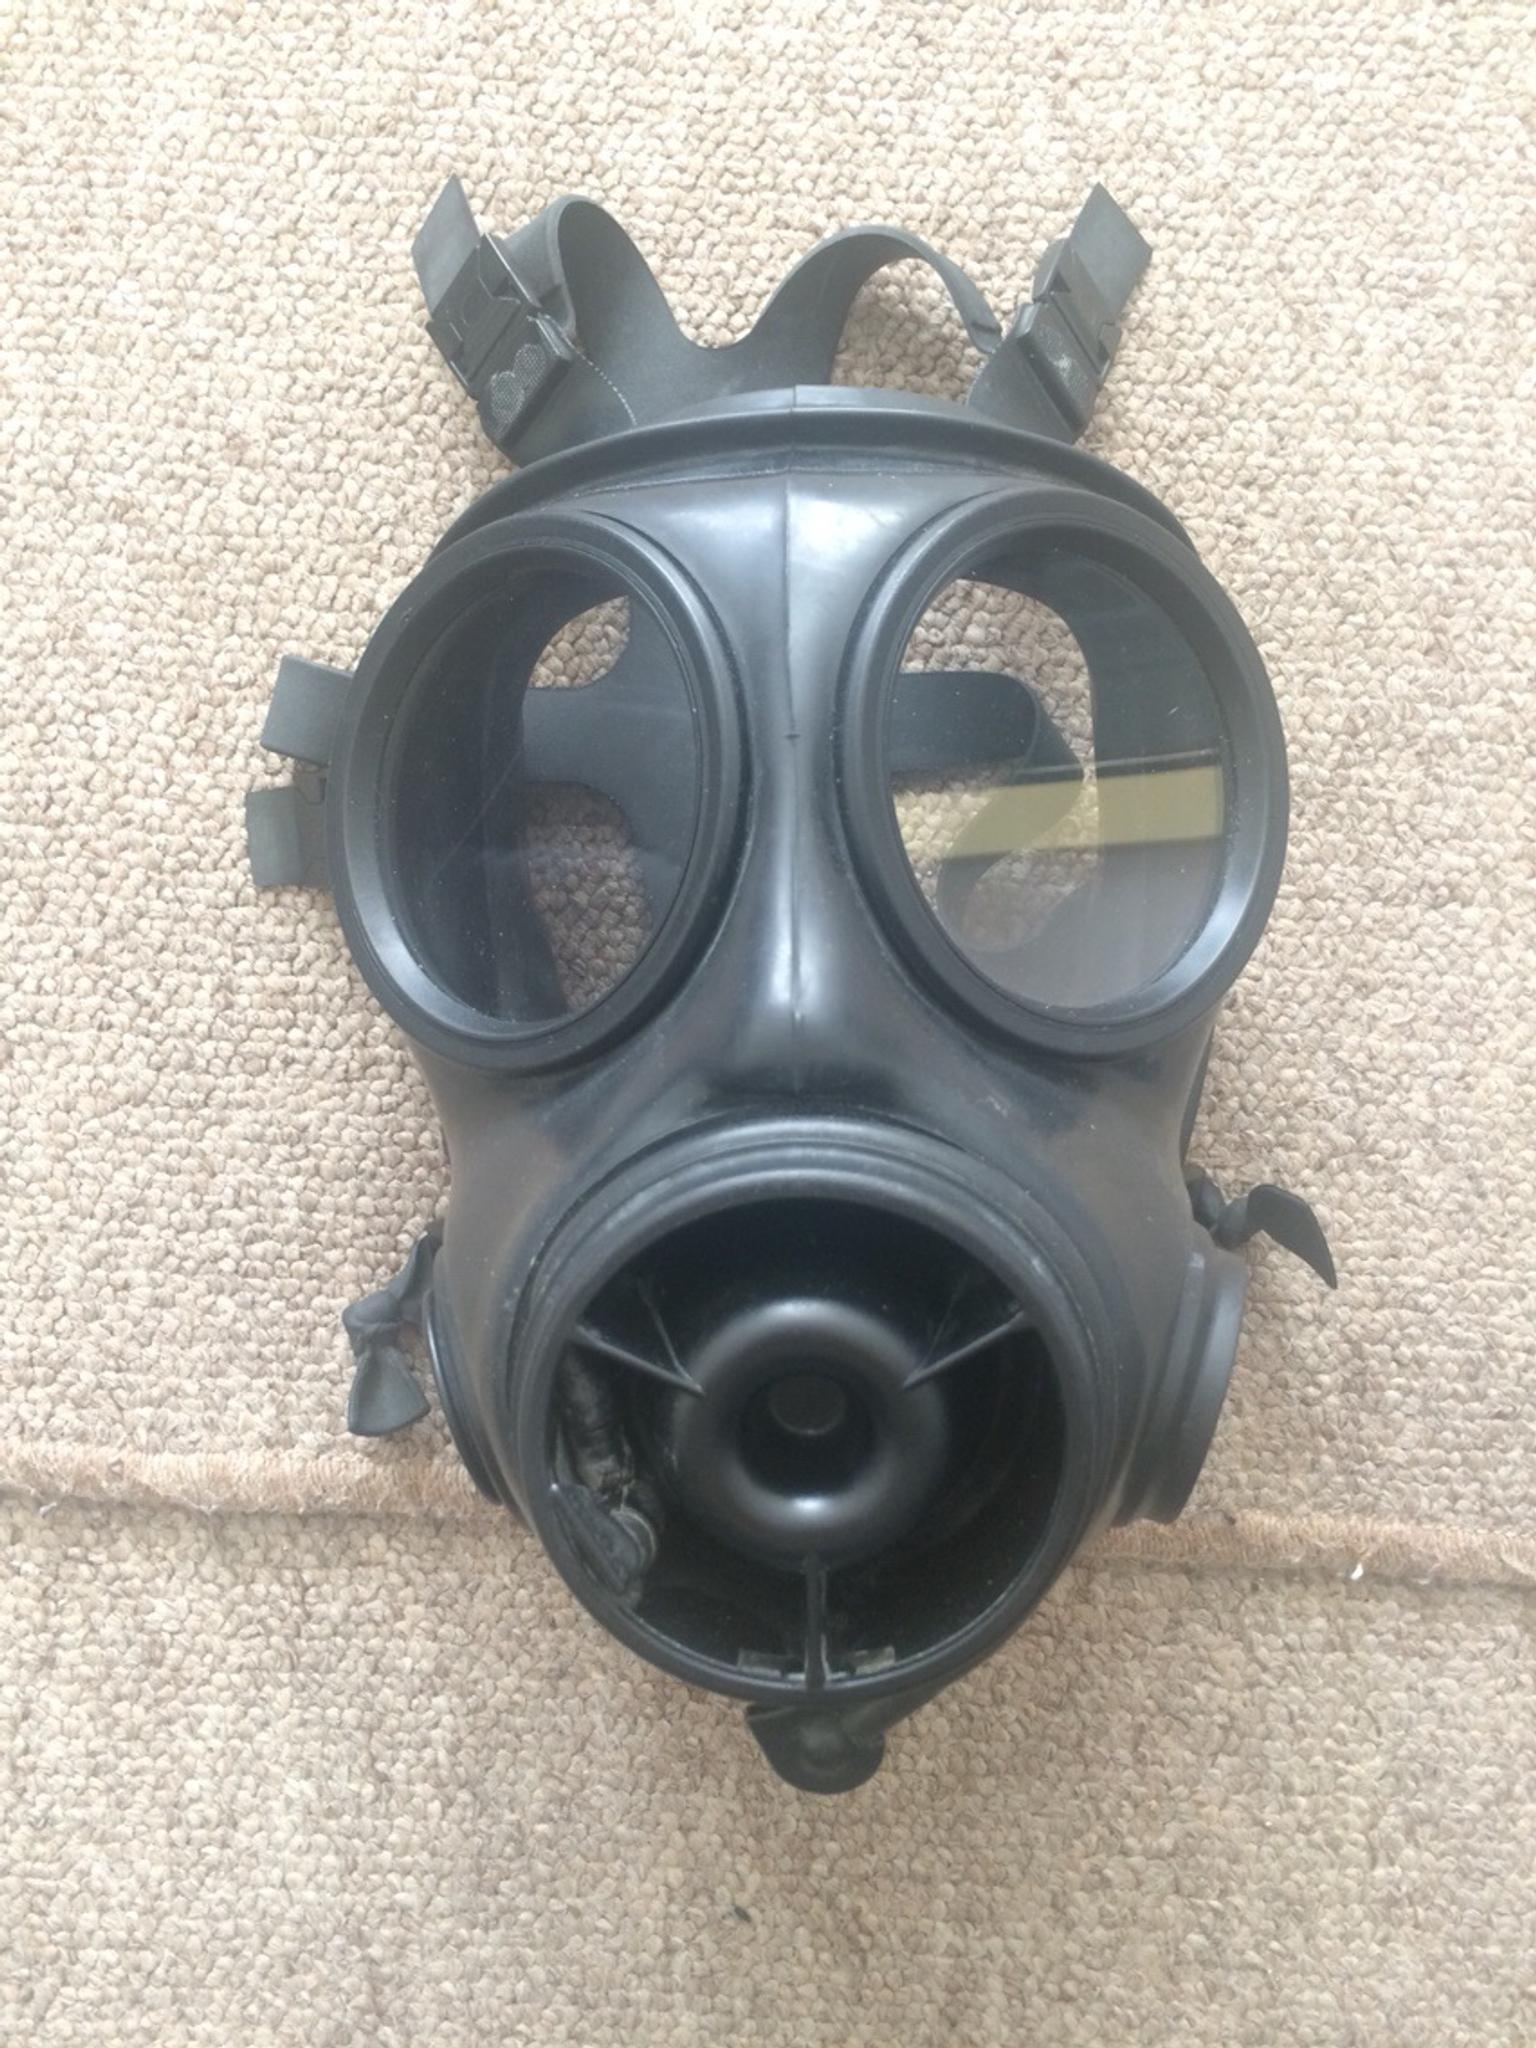 Genuine 1989 Avon S10 Gas Mask In Tn28 Greatstone For 35 00 For